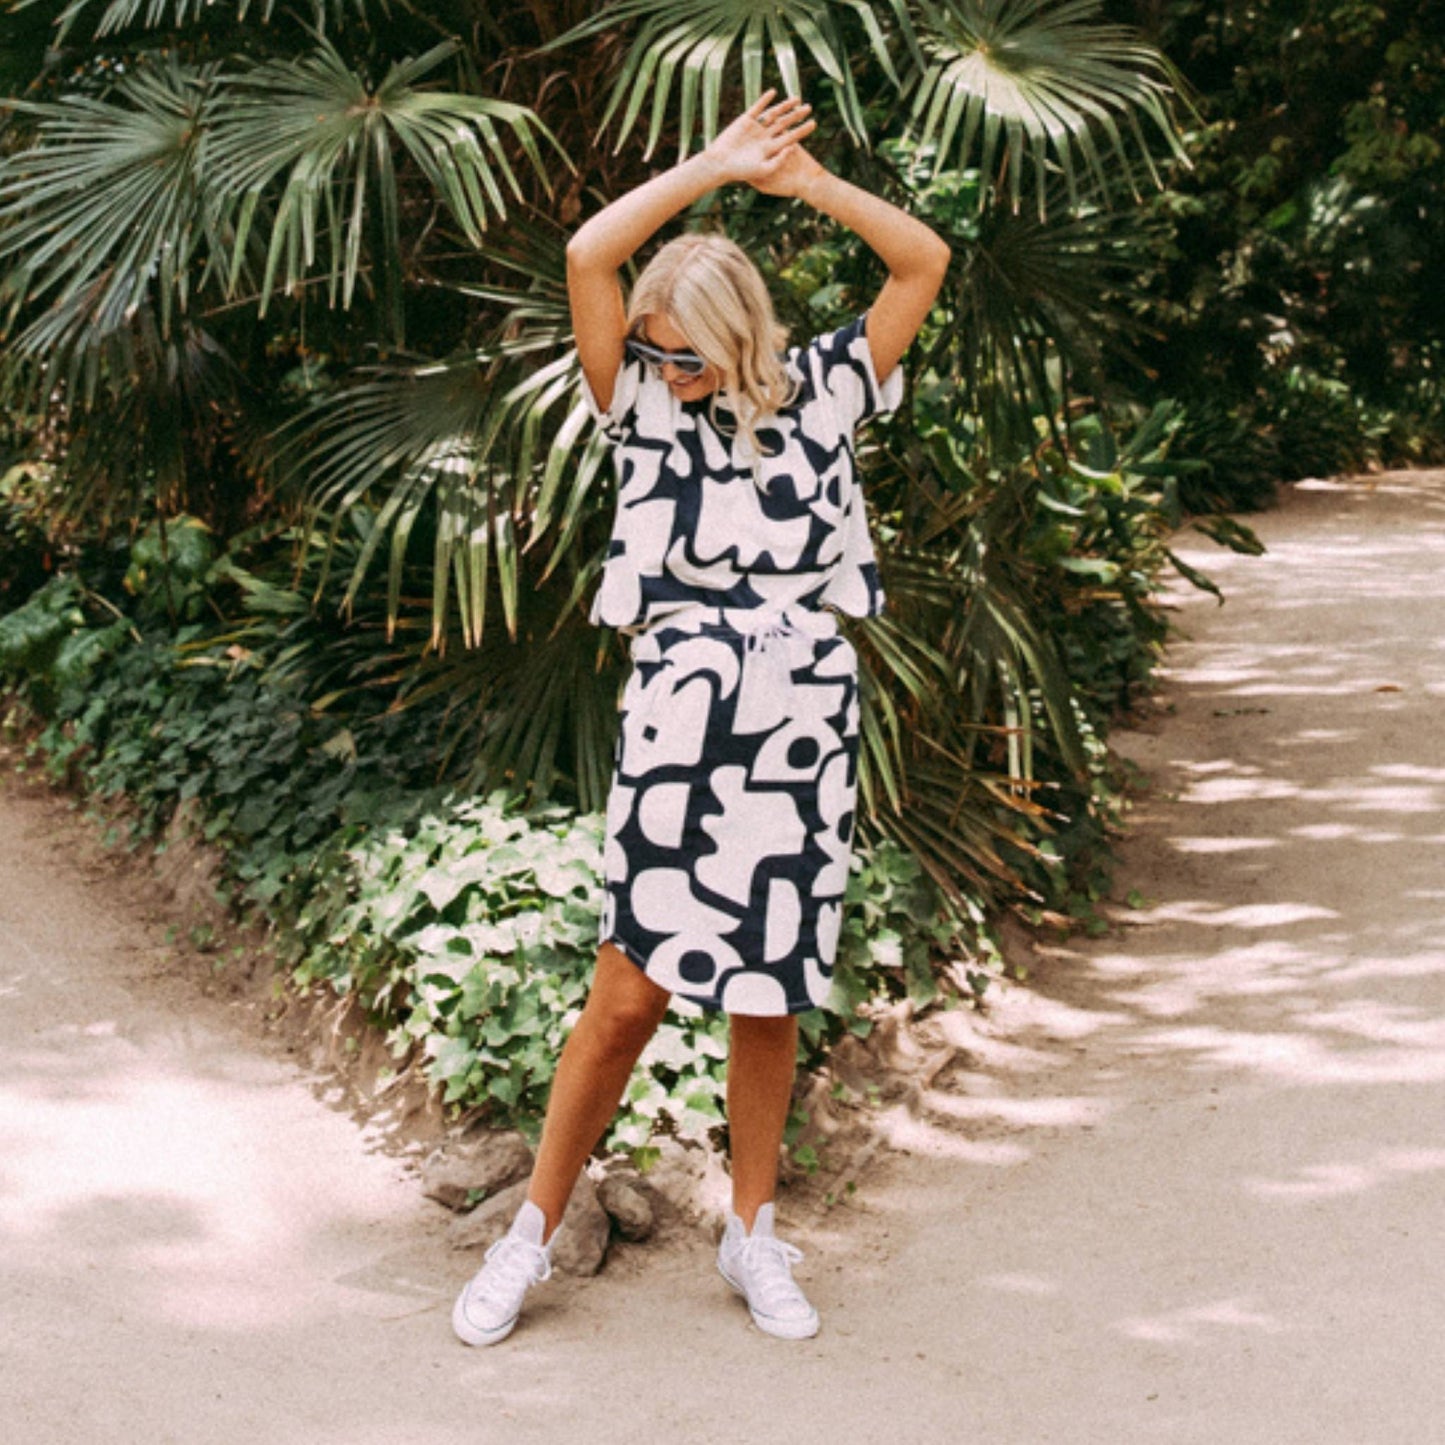 Featuring a gorgeous geometric yardage print in classic navy & white the Miro Skirt from Elm Lifestyle is made from organic cotton . This pull on skirt features side pockets and made is made for comfort.